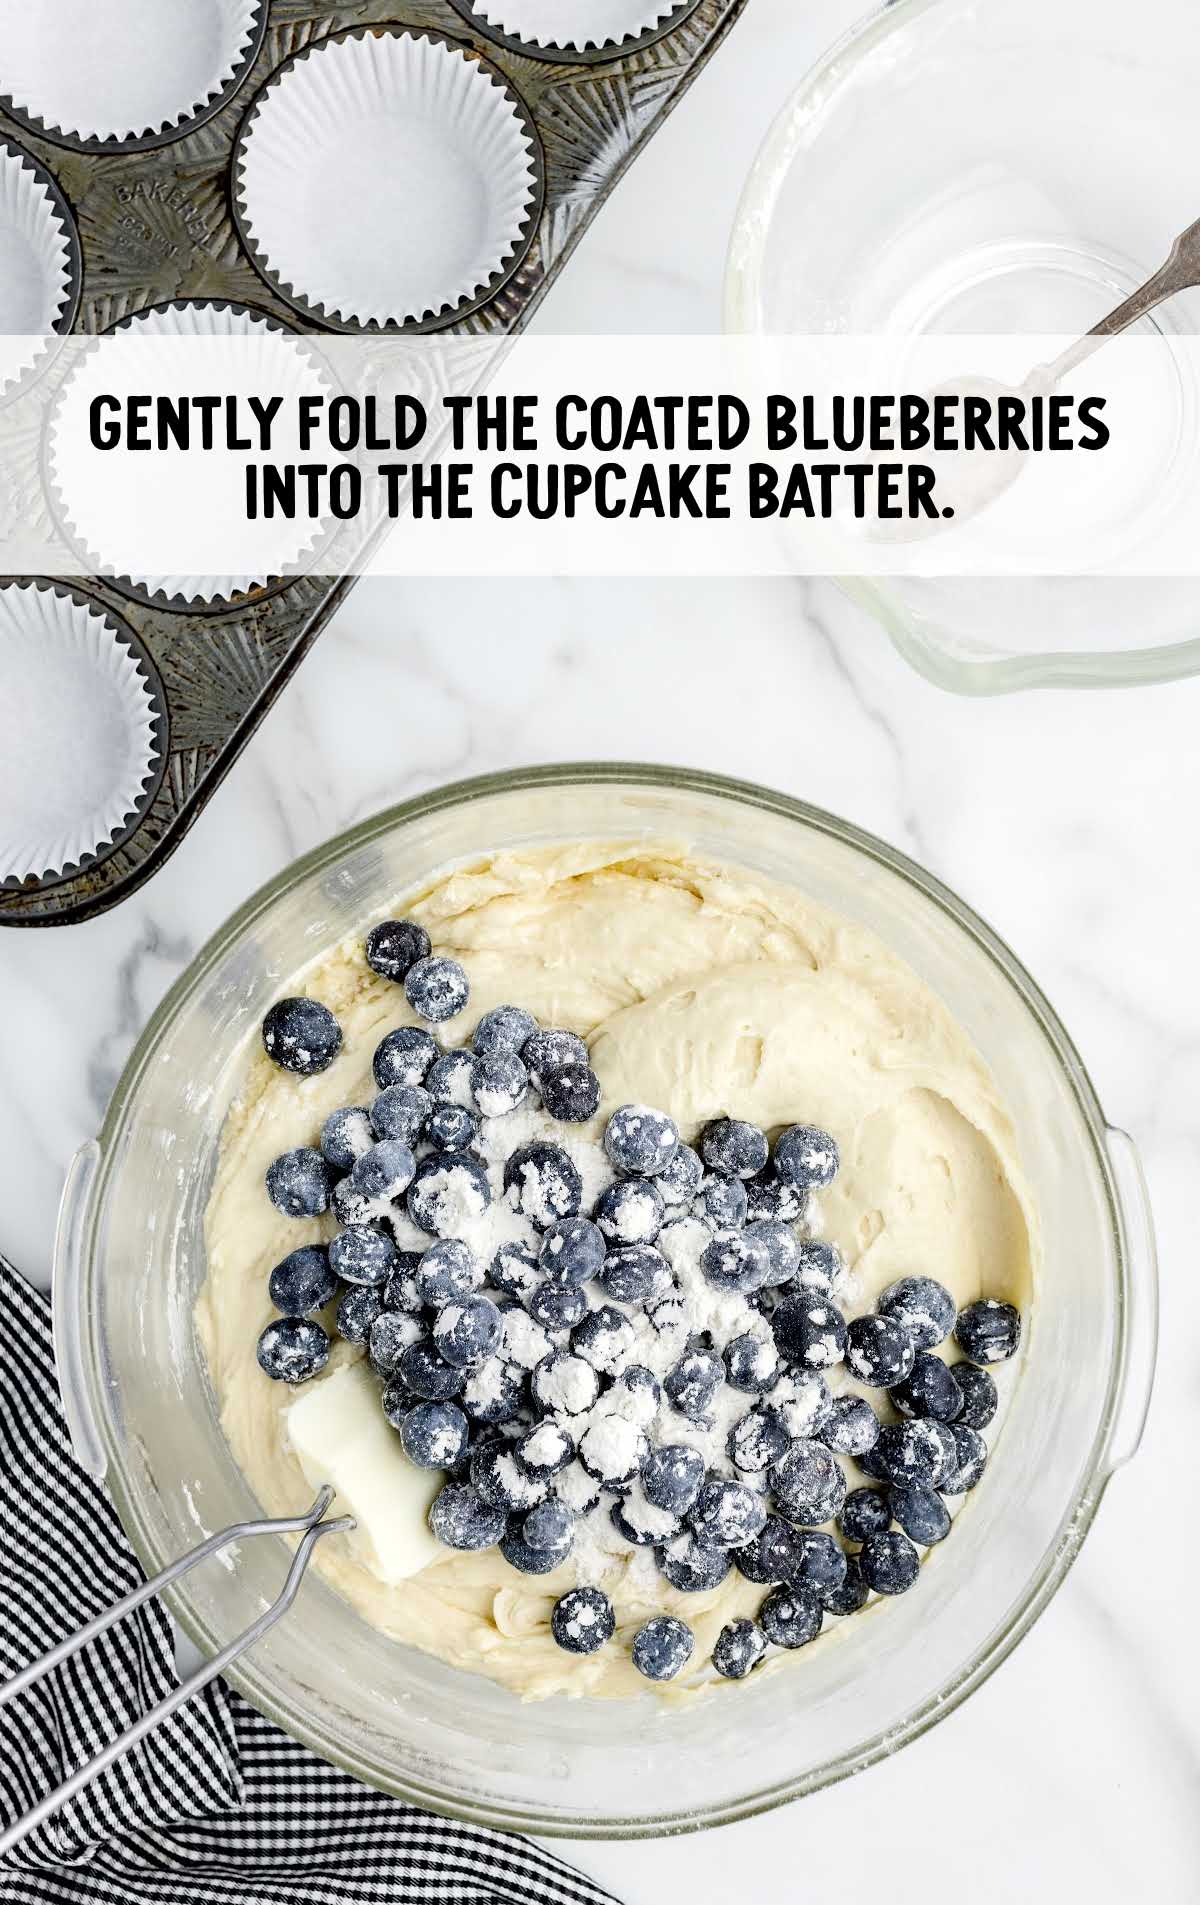 blueberries folded into the cupcake batter